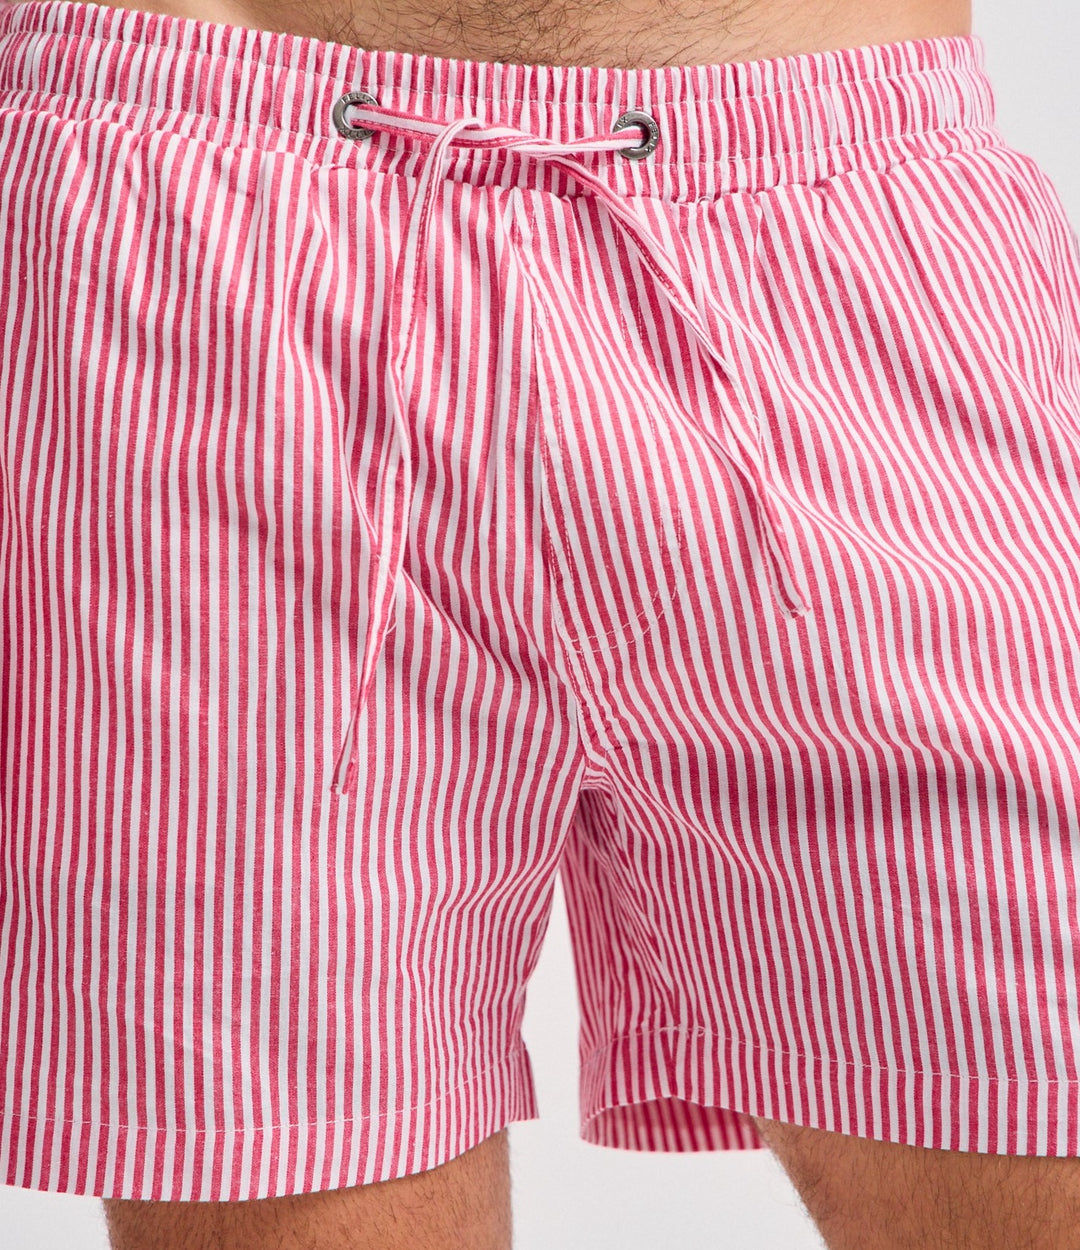 6" Indio Cotton Shorts Red Stripes